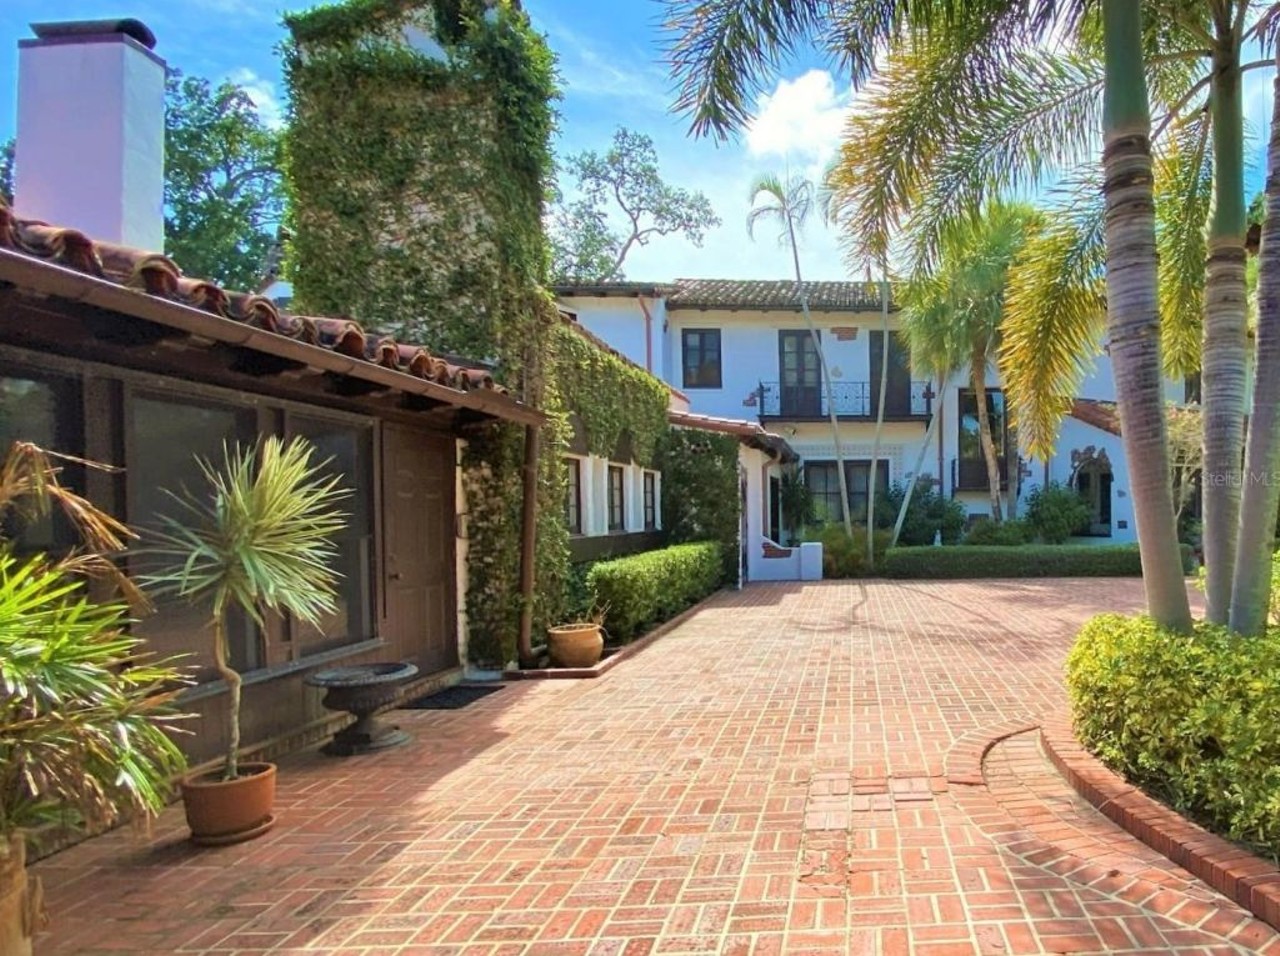 This perfect recreation of an Italian villa on the Indian River is on the market for $11 million